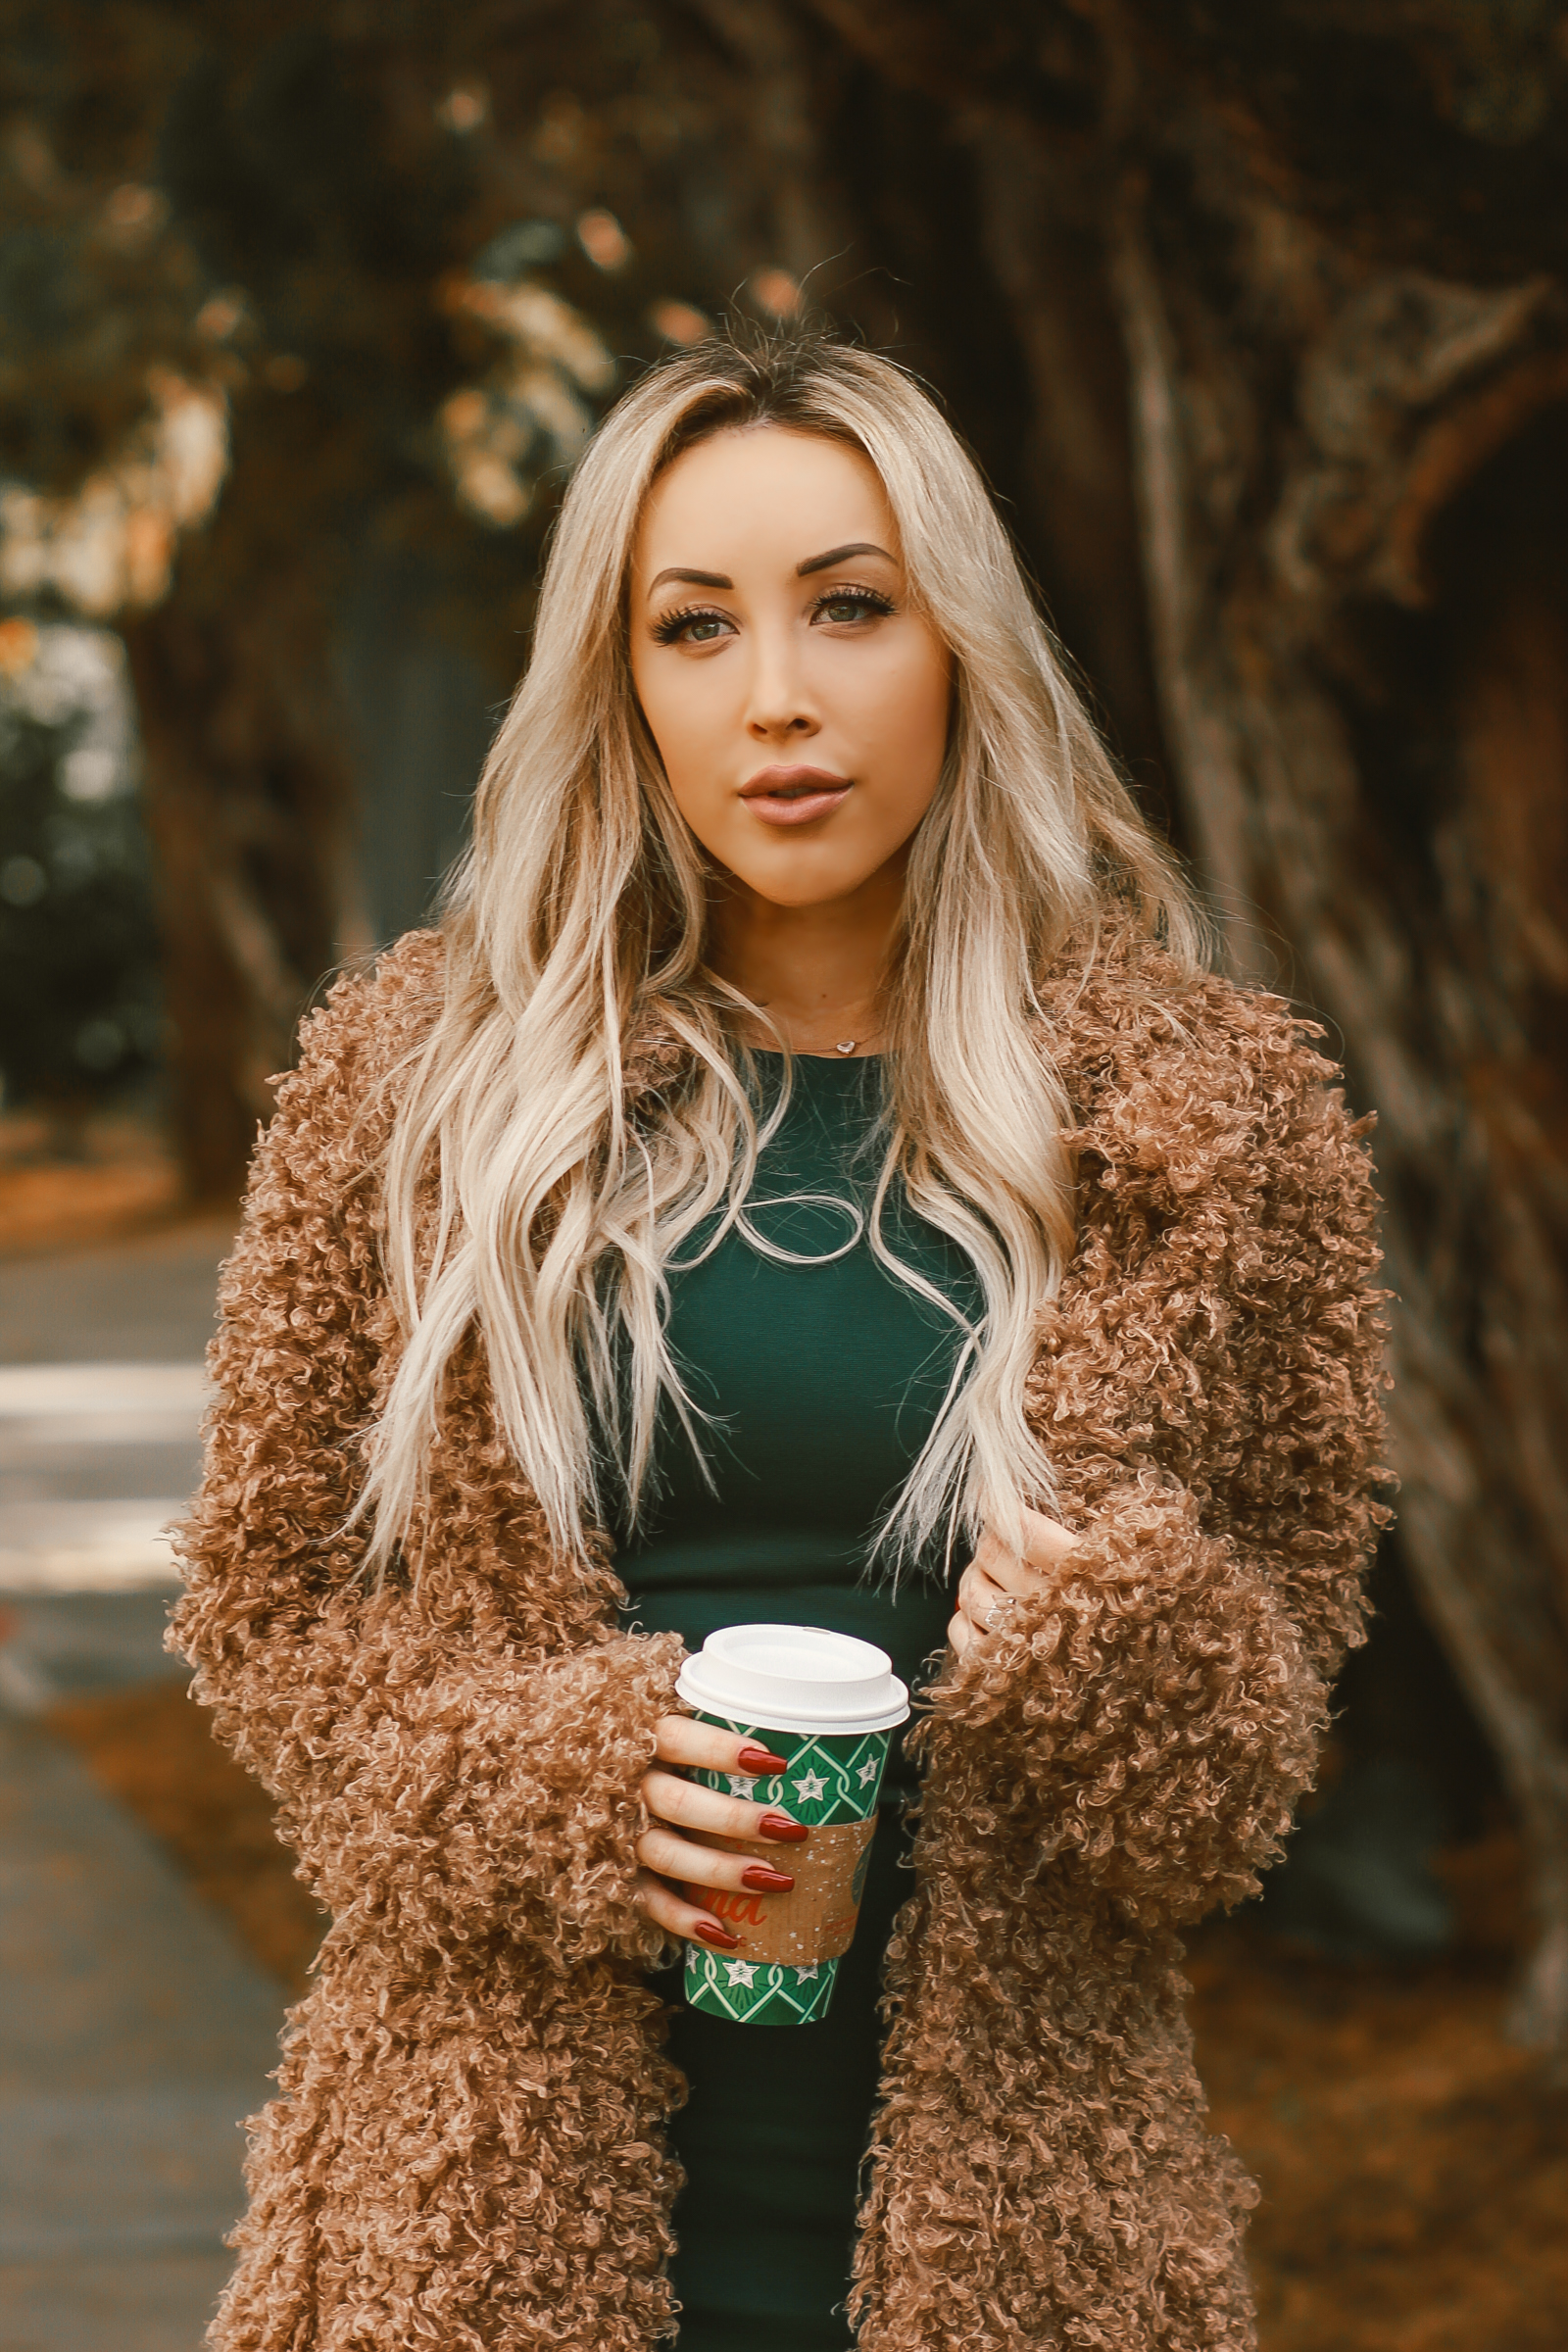 Forest Green Dress | Christmas Outfit Inspo | Holiday Outfit | Holiday Style | Dark Green Dress | Blondie in the City by Hayley Larue